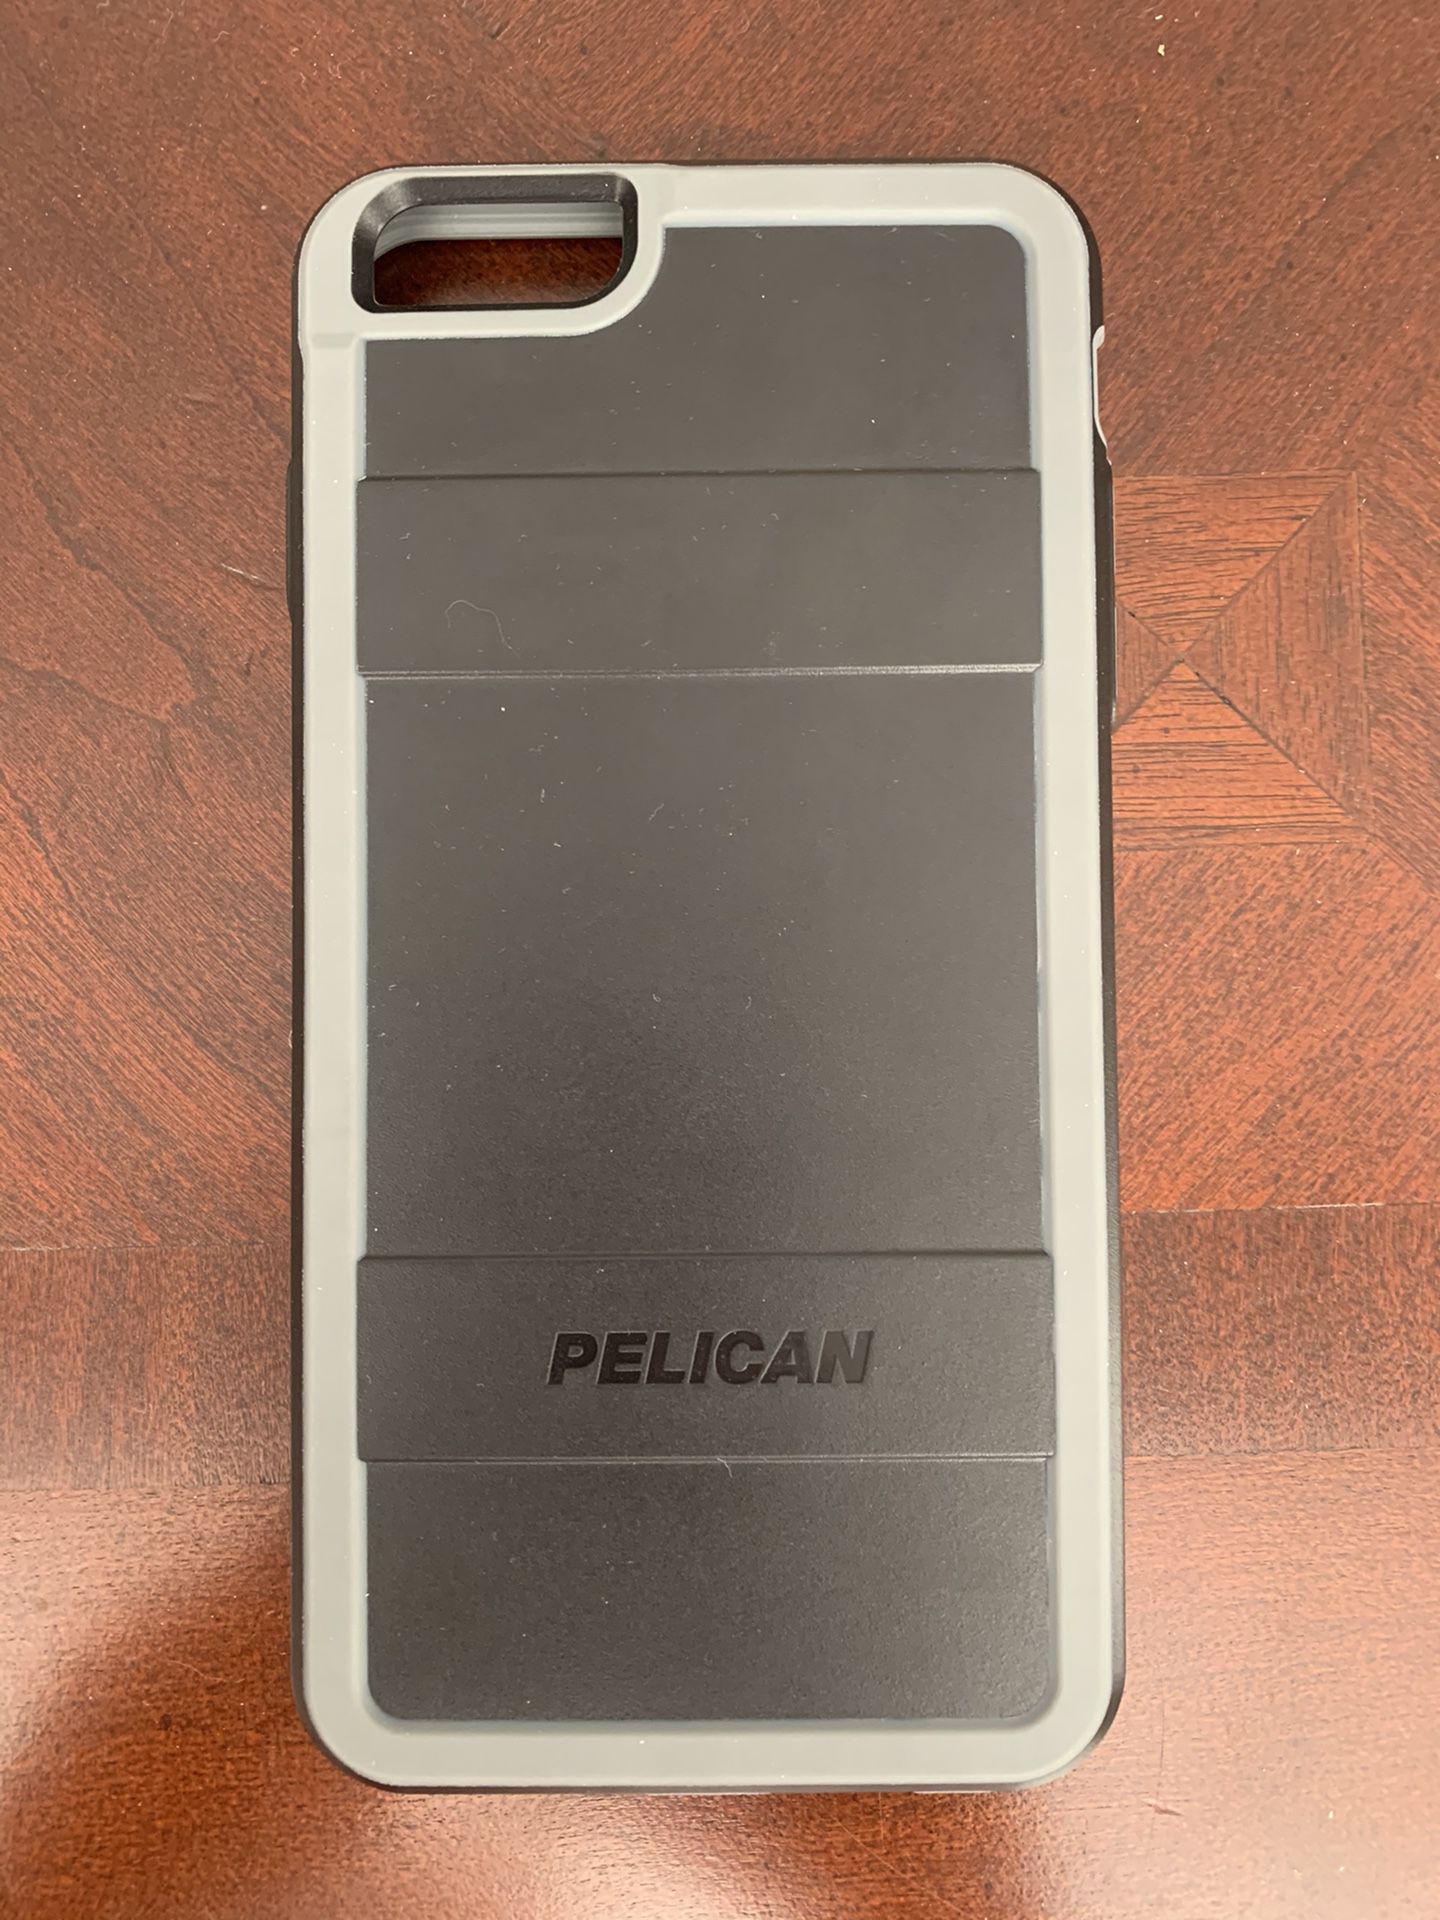 iPhone Pelican Case and Screen Protector